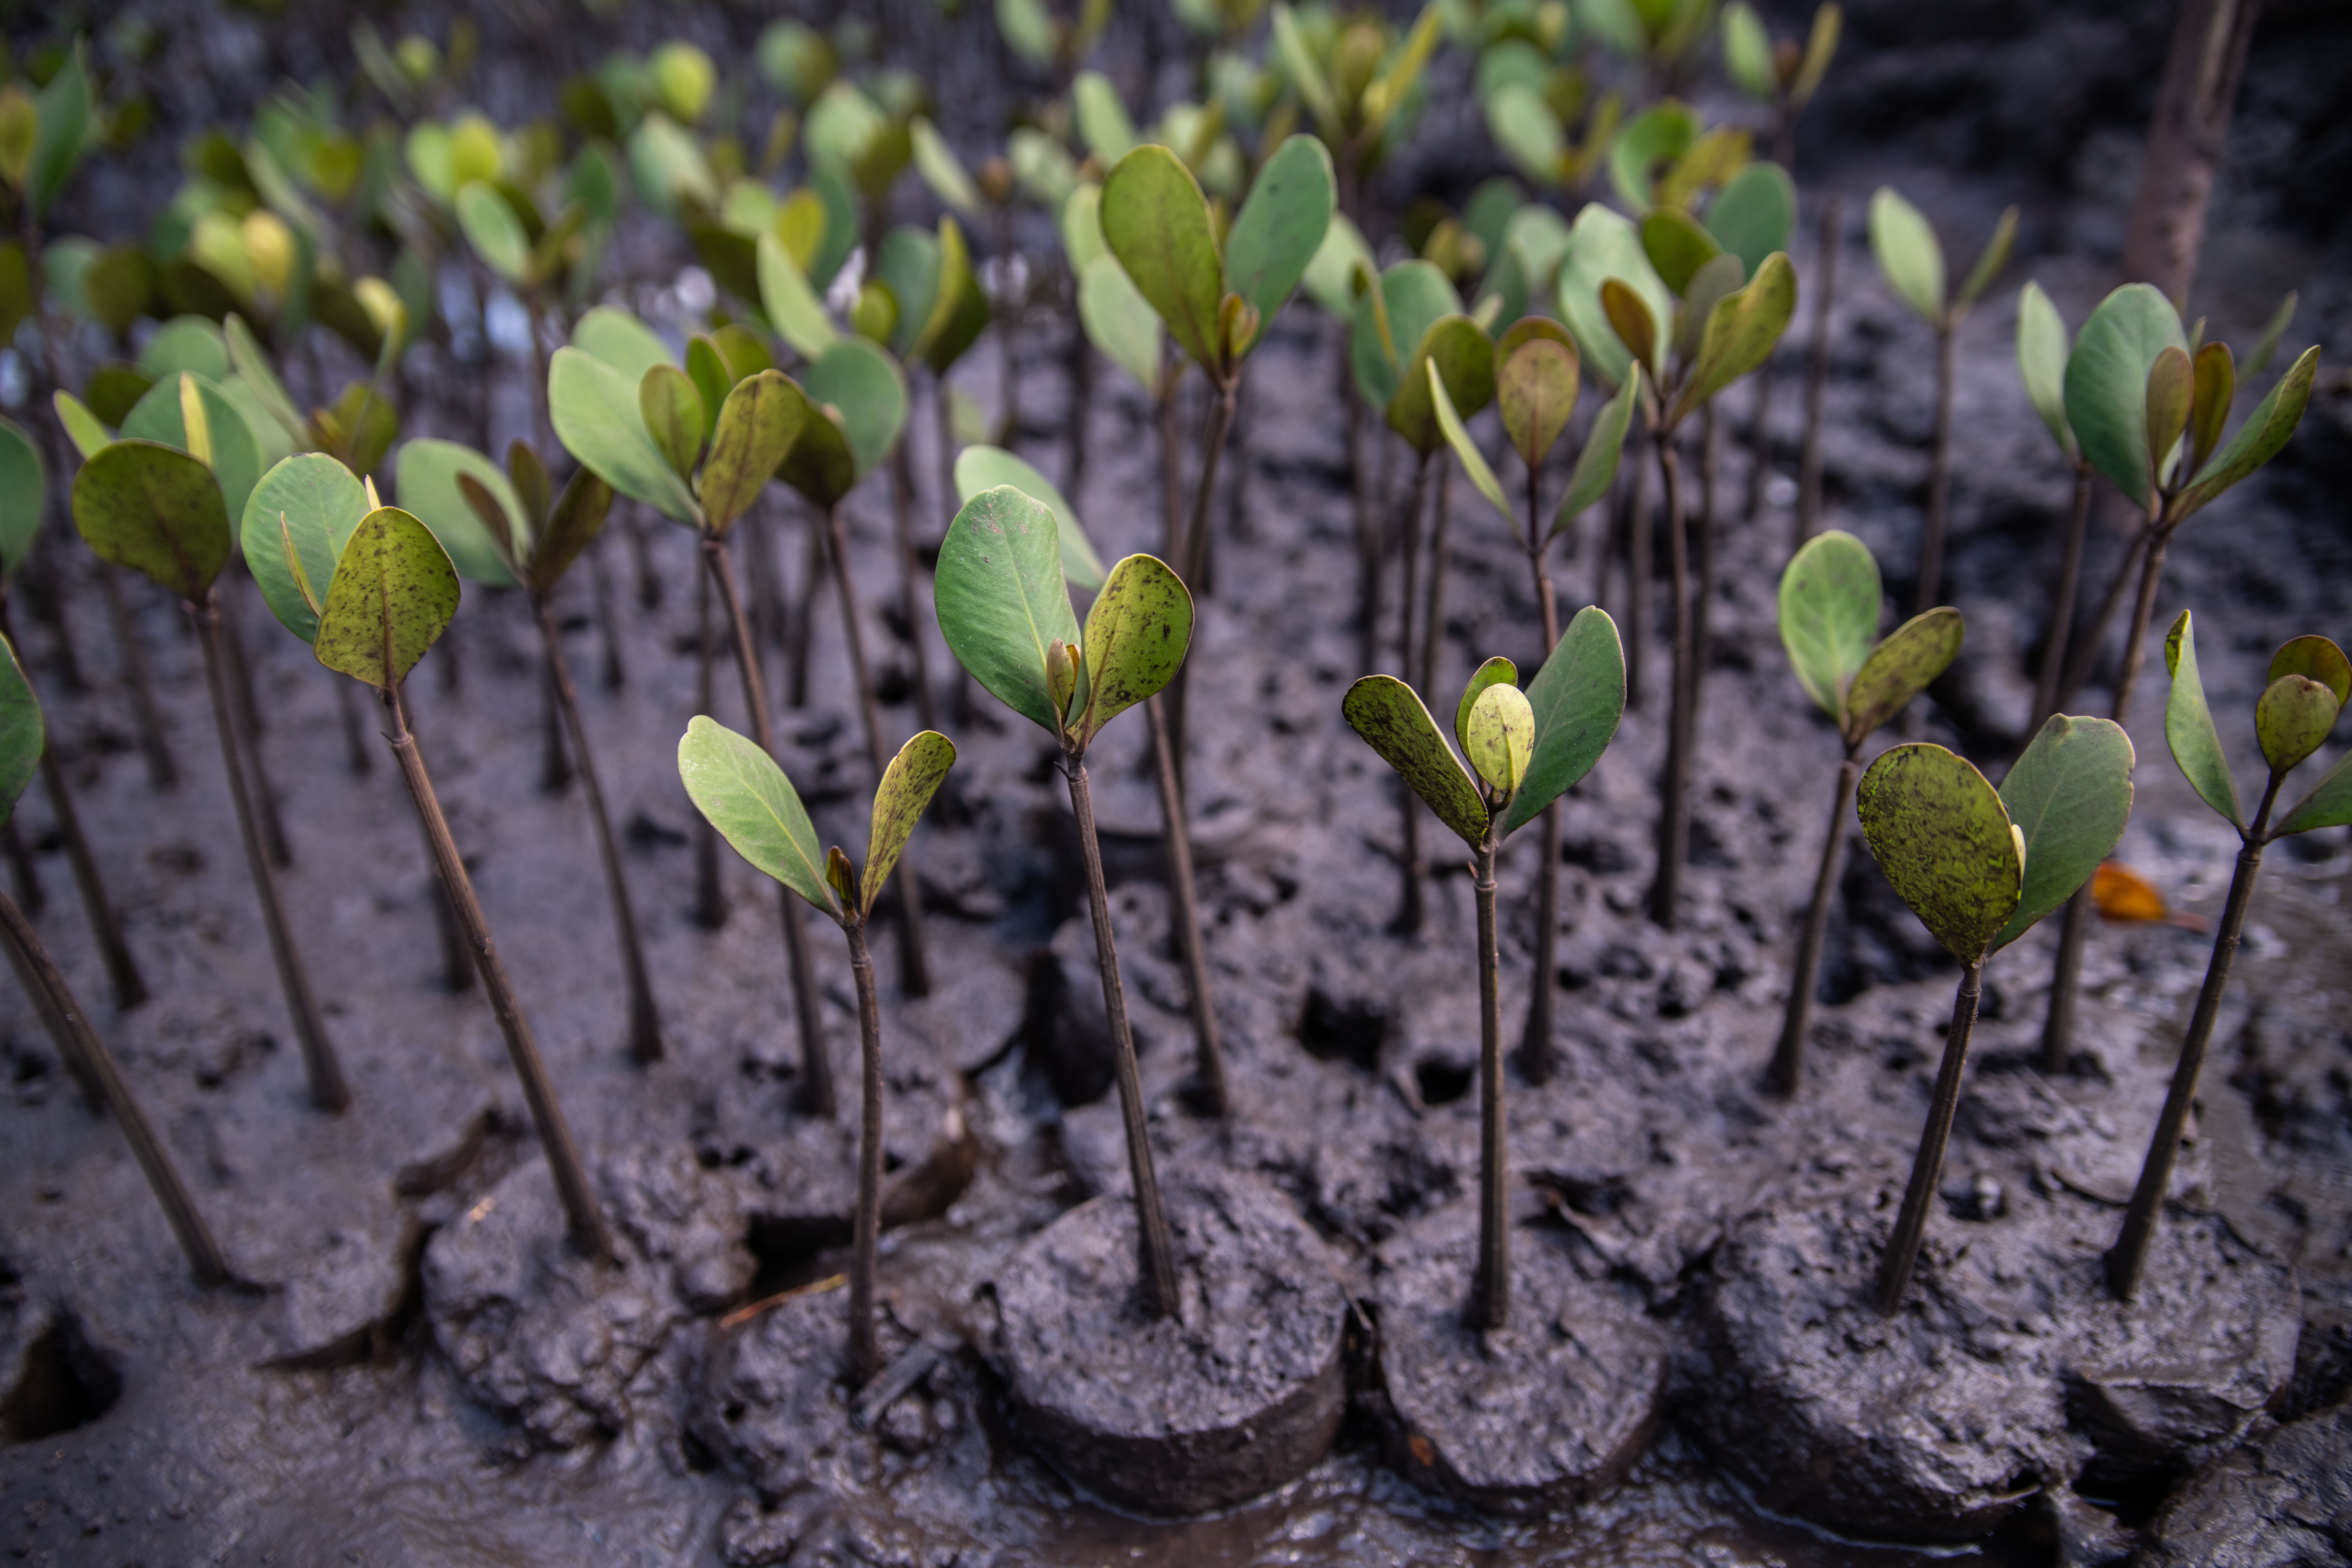 Shoots of young mangrove trees rise from the mud near the coast on an island in Kenya.